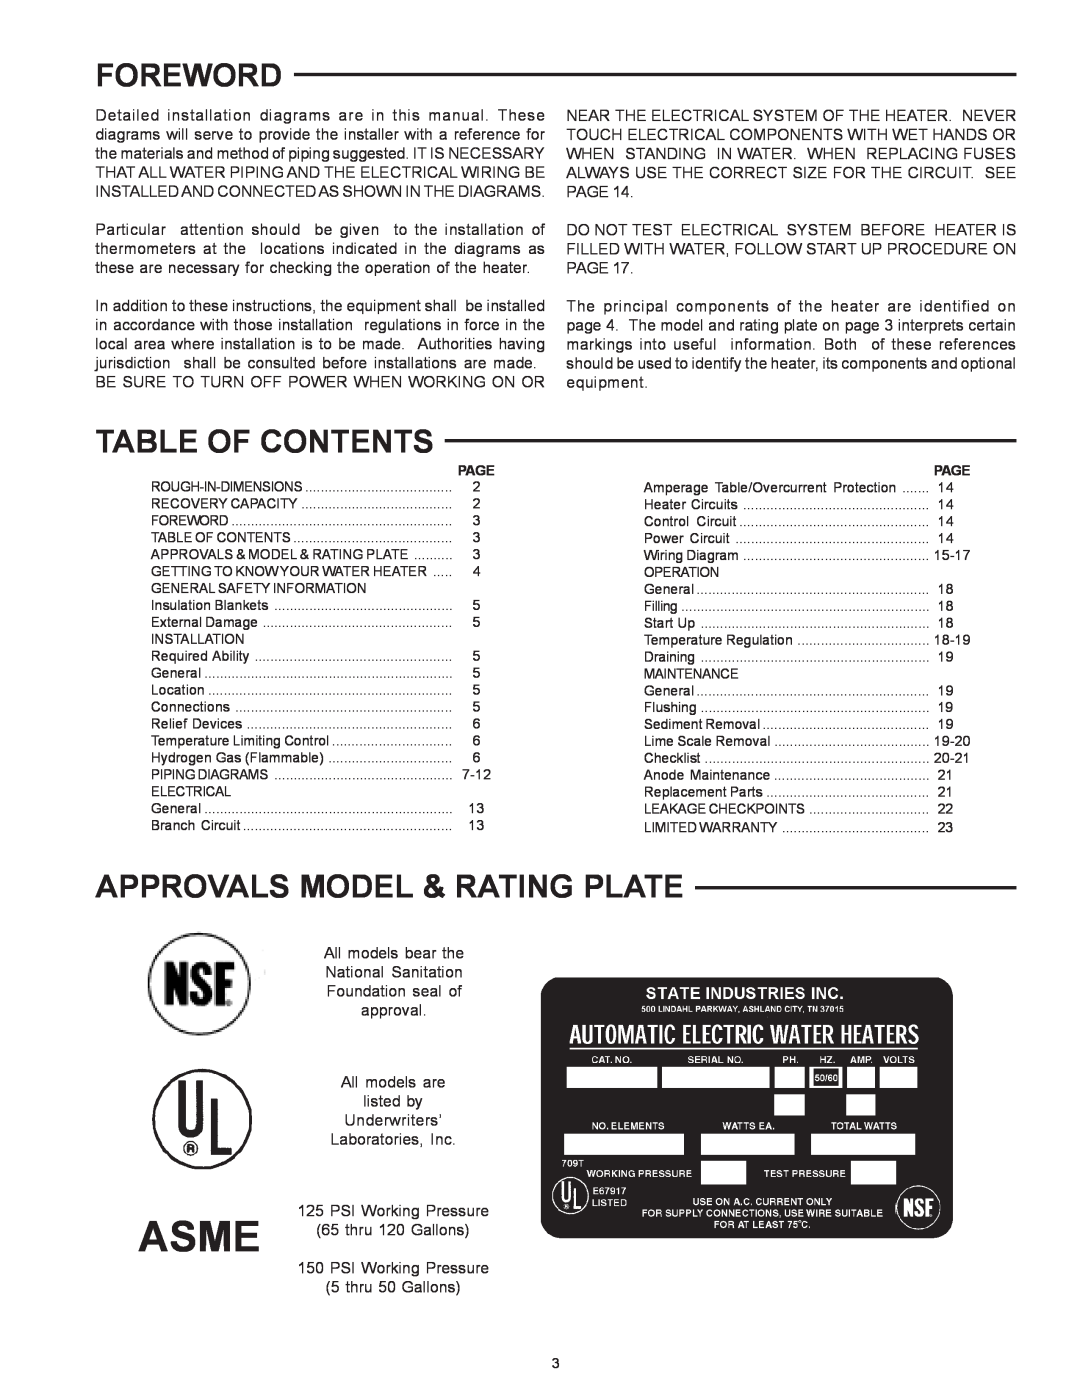 State Industries SSE-120, SSE-5 warranty Foreword, Table Of Contents, Approvals Model & Rating Plate, Asme 